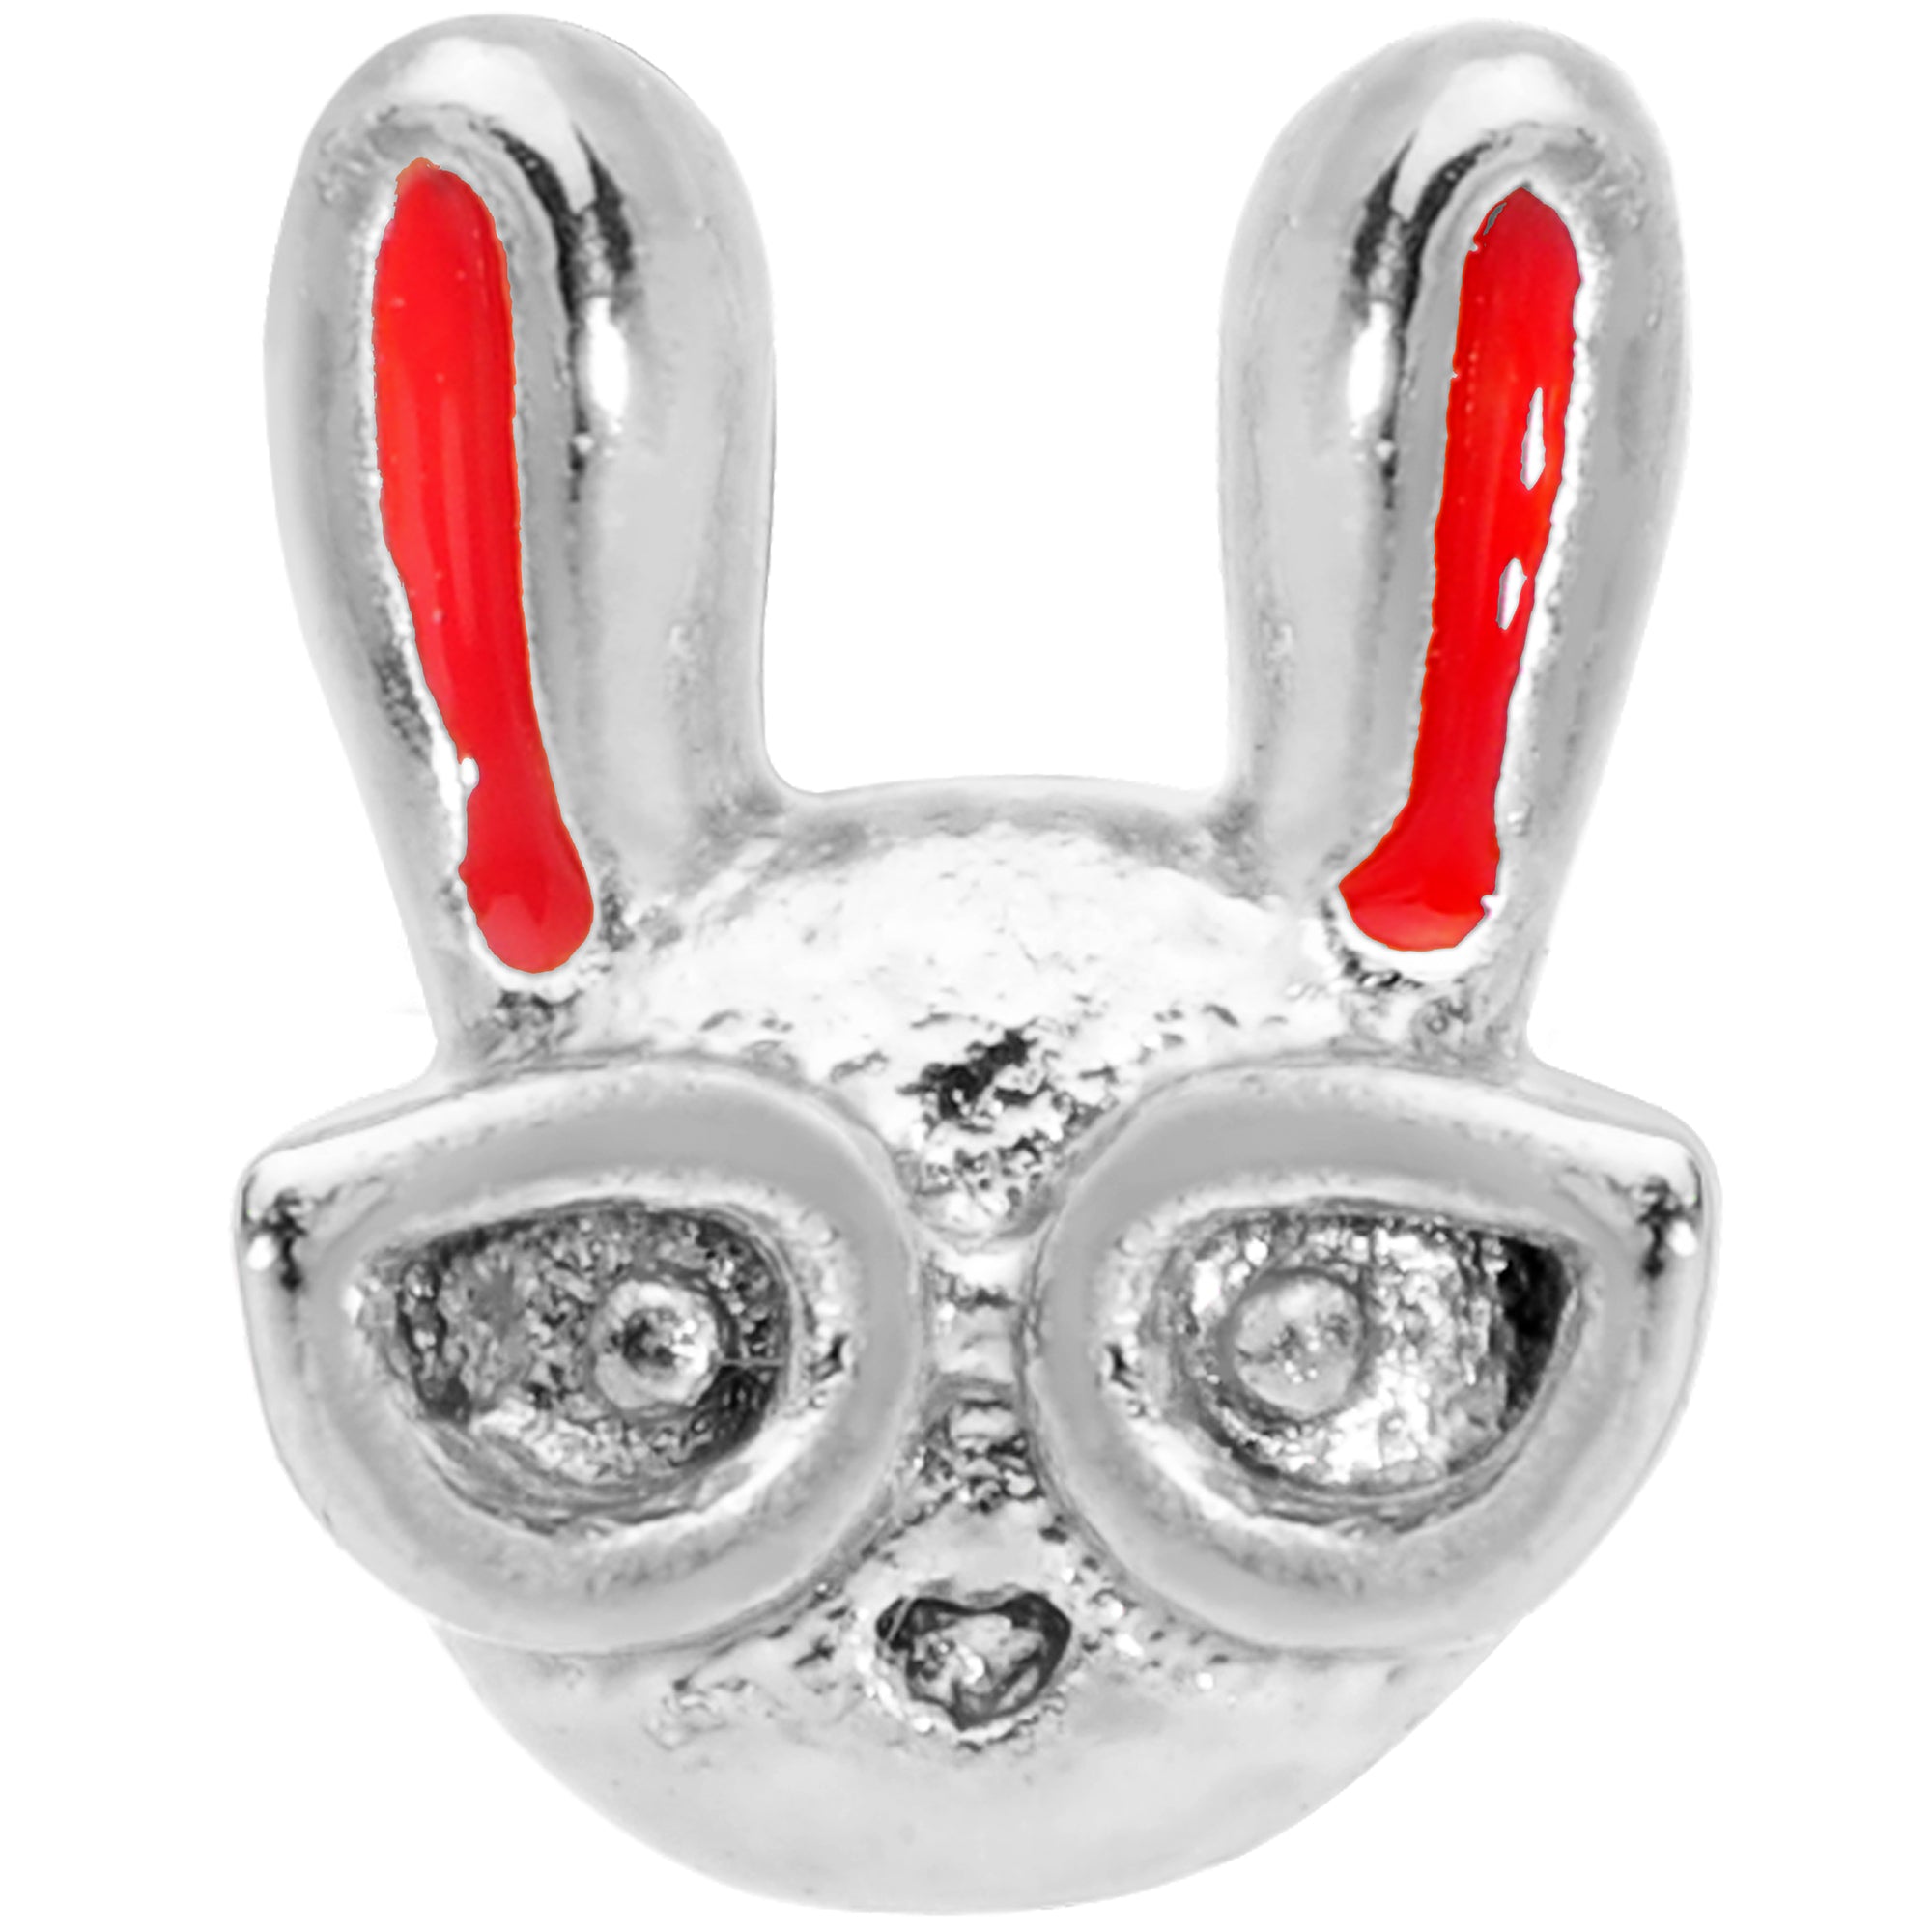 22 Gauge 5/16 Pink Ears Nerdy Easter Bunny L Shaped Nose Ring